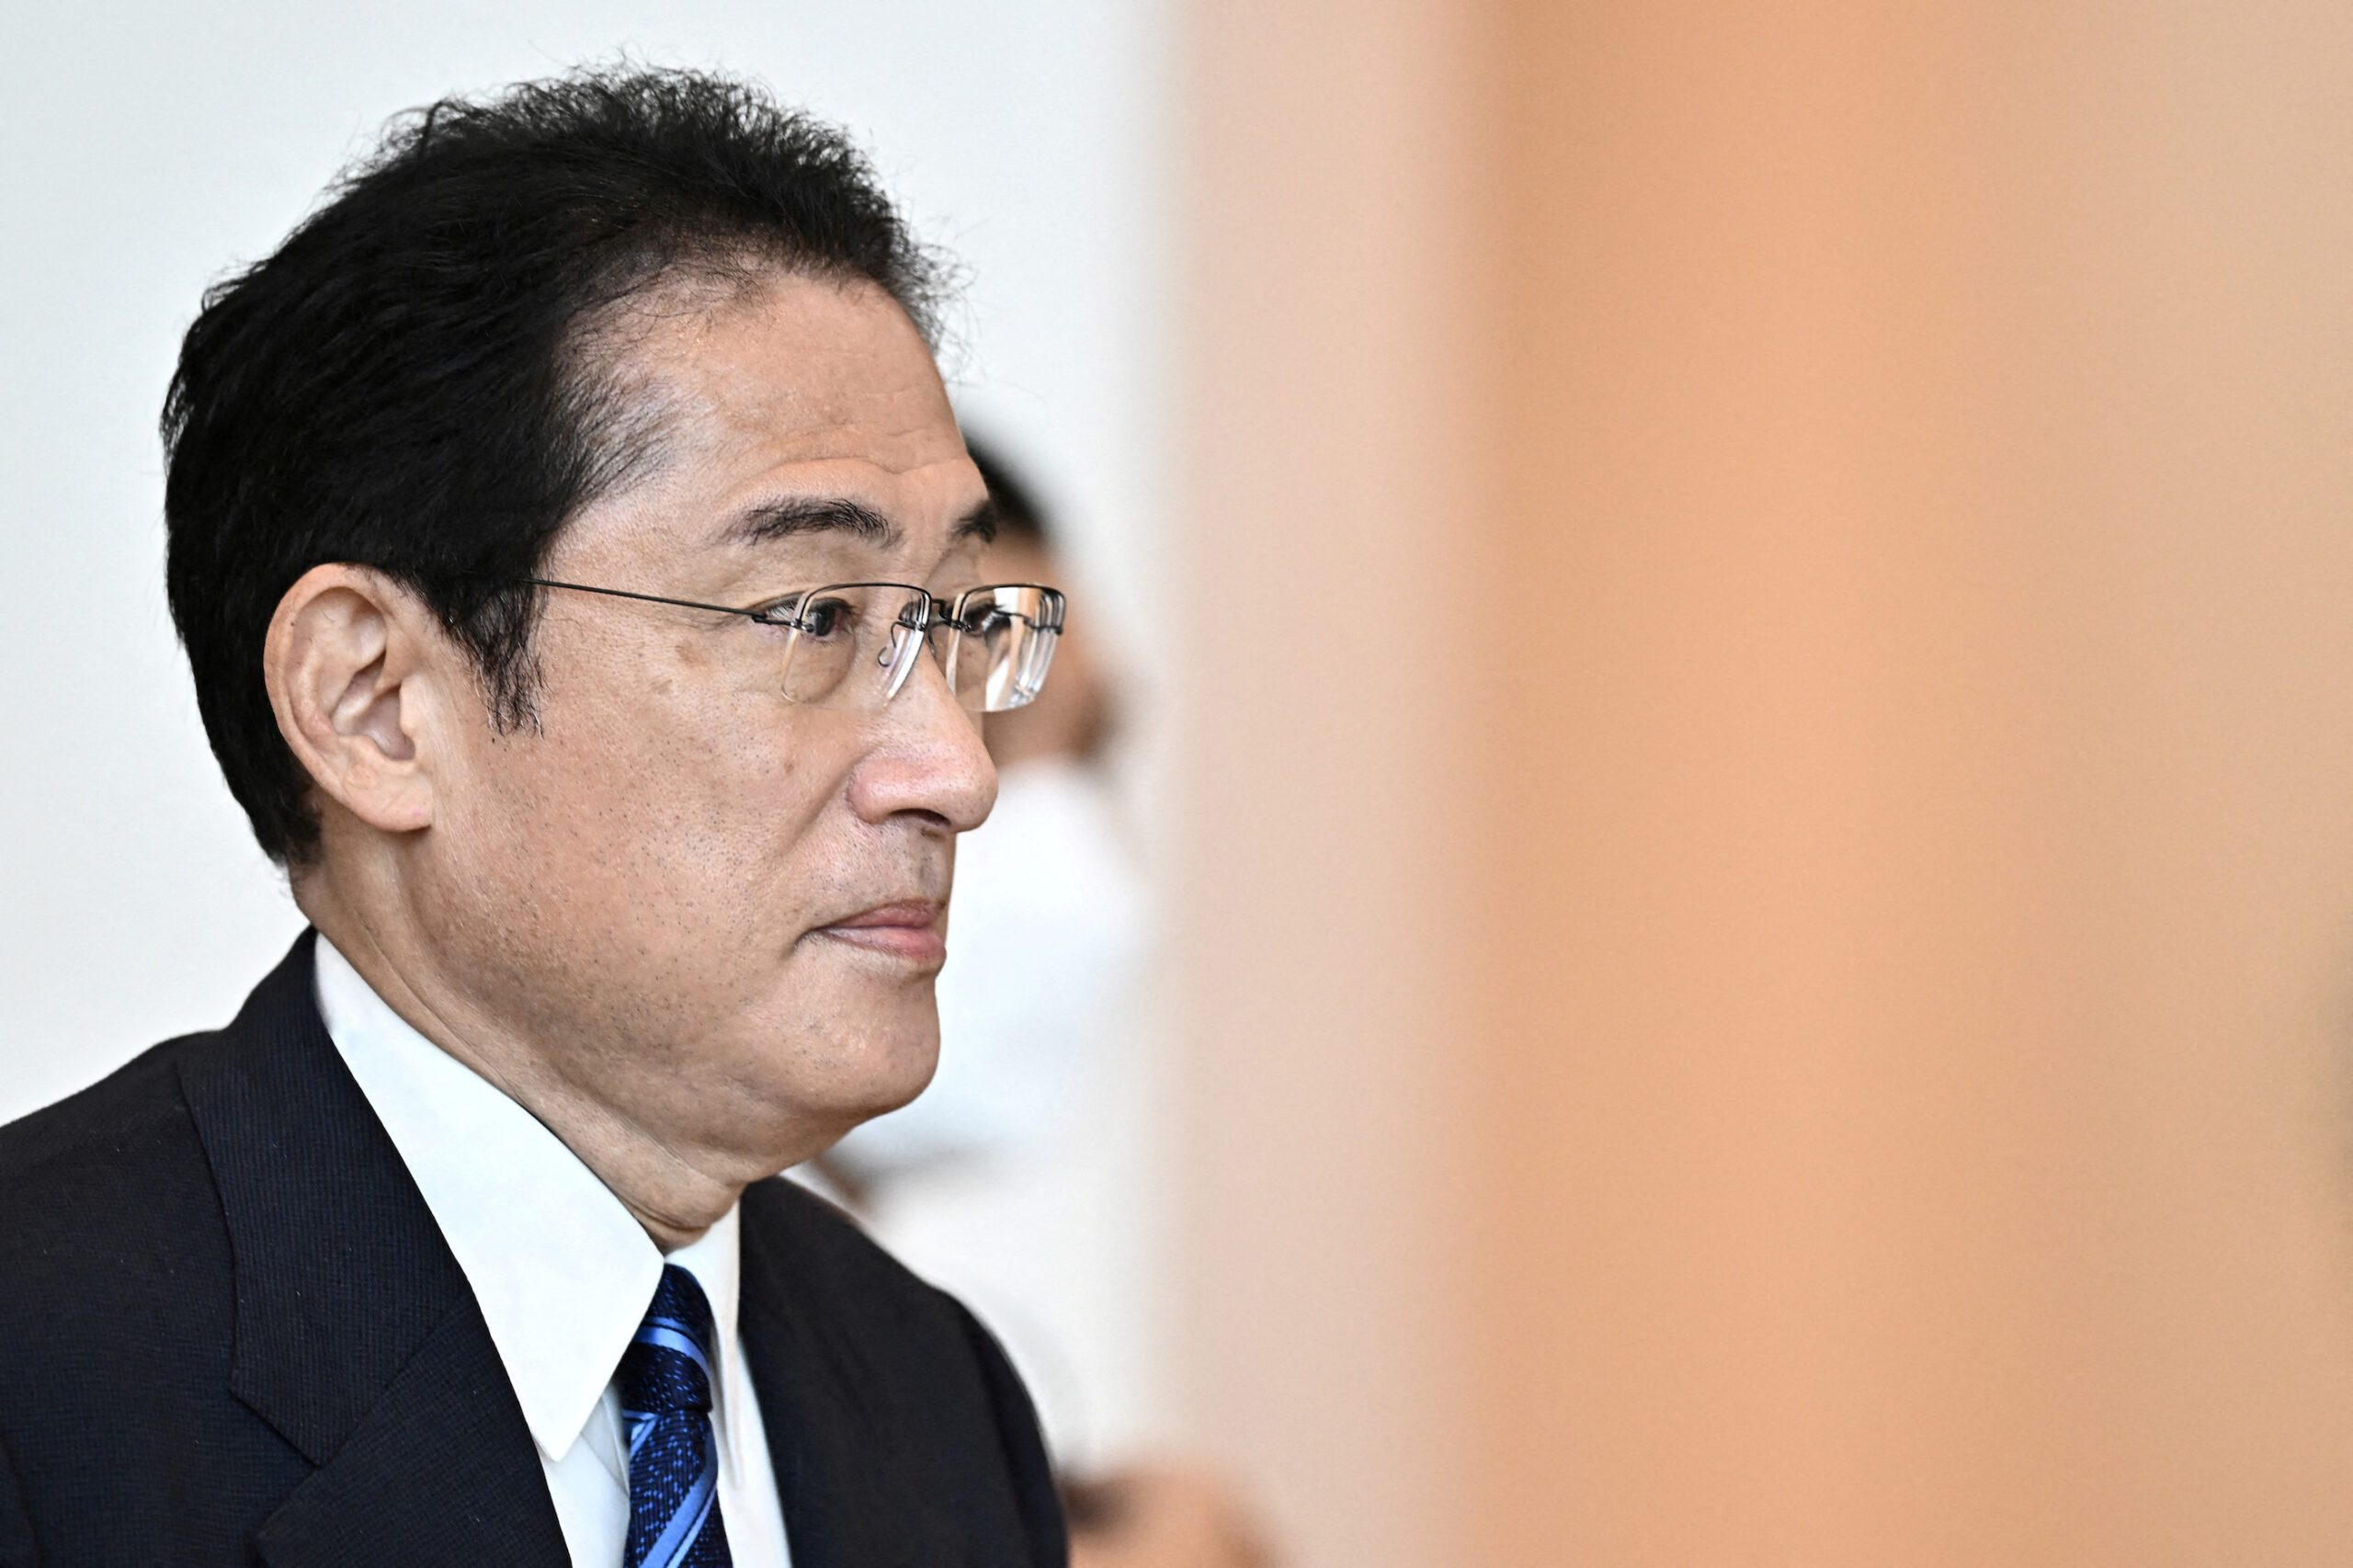 Japanese prime minister under pressure over campaign expenditure report